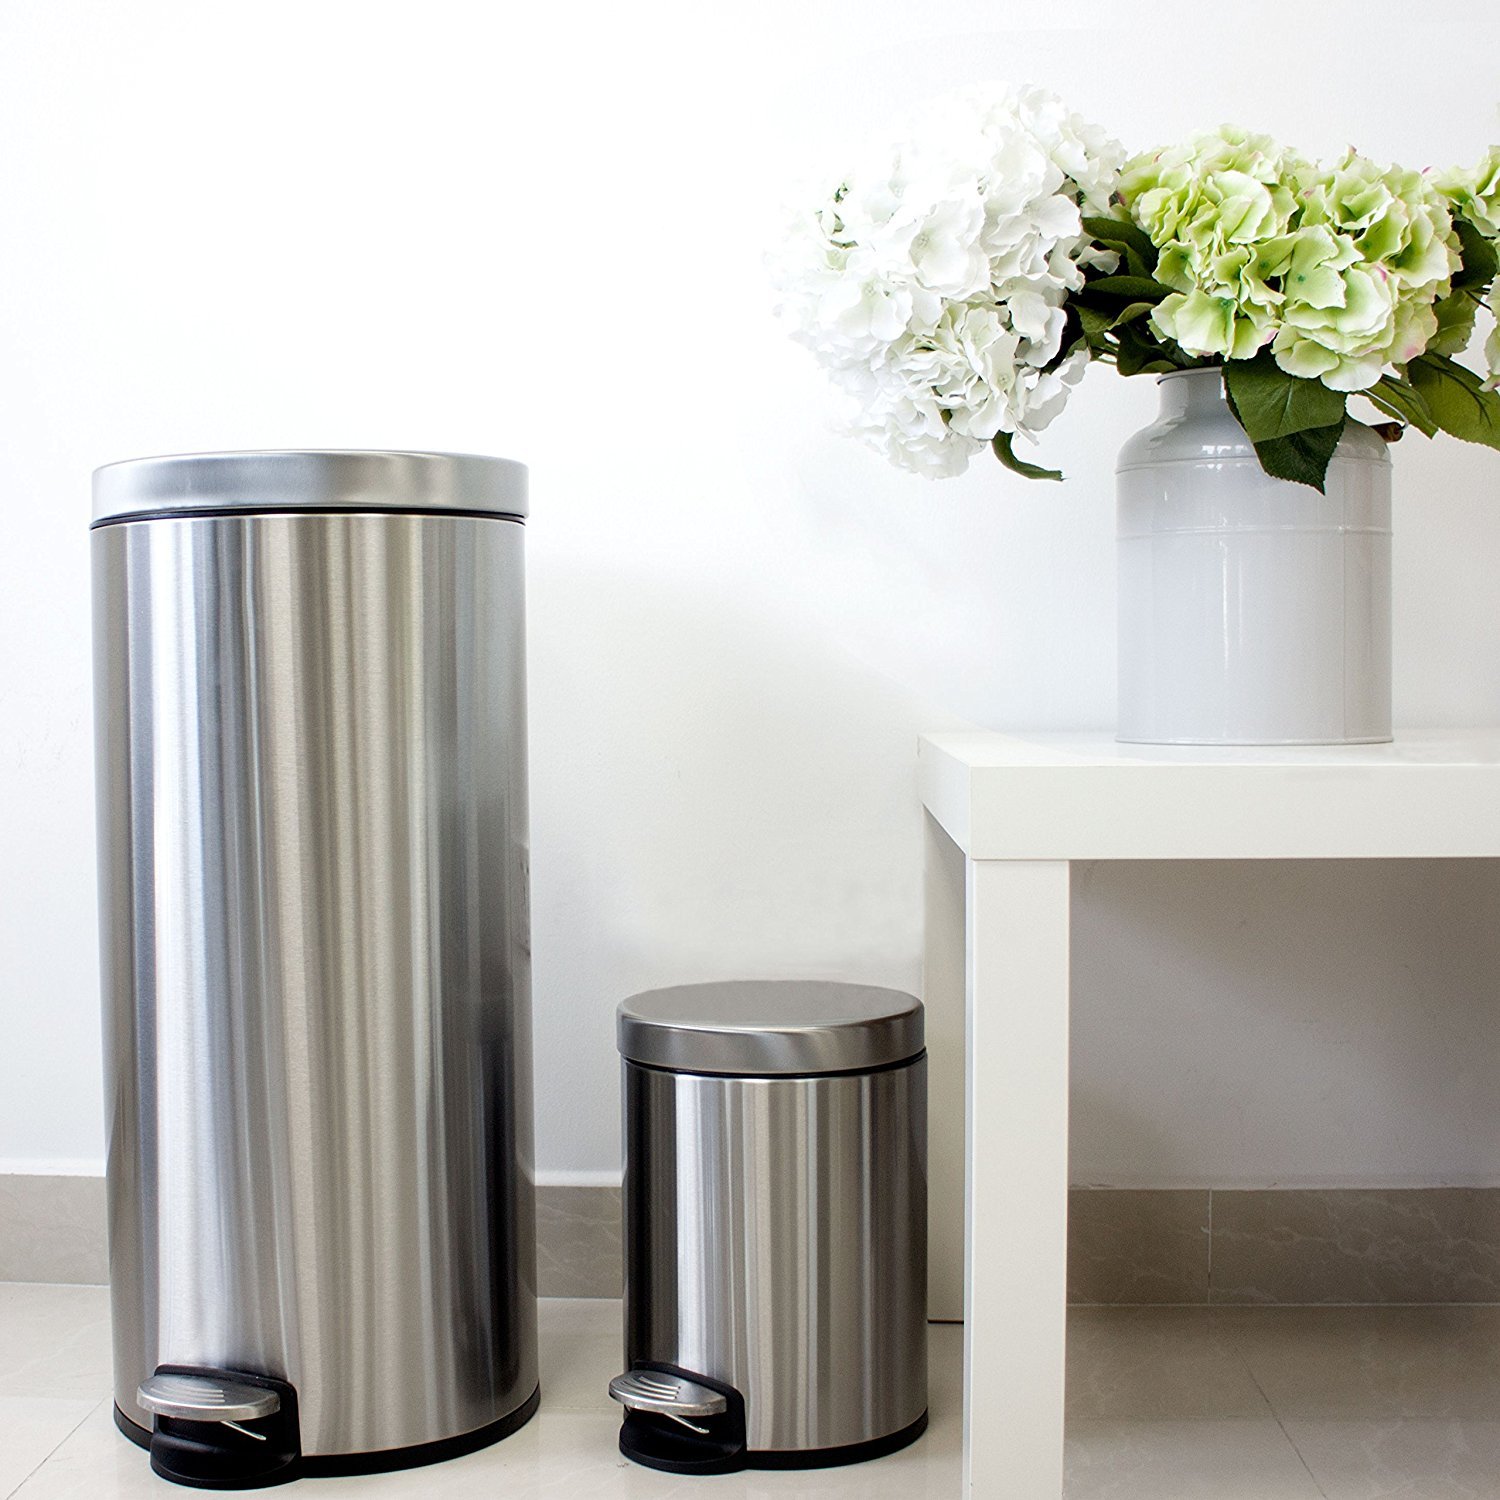 Trash Can Sizes: Which Size to Use in Every Room at Home